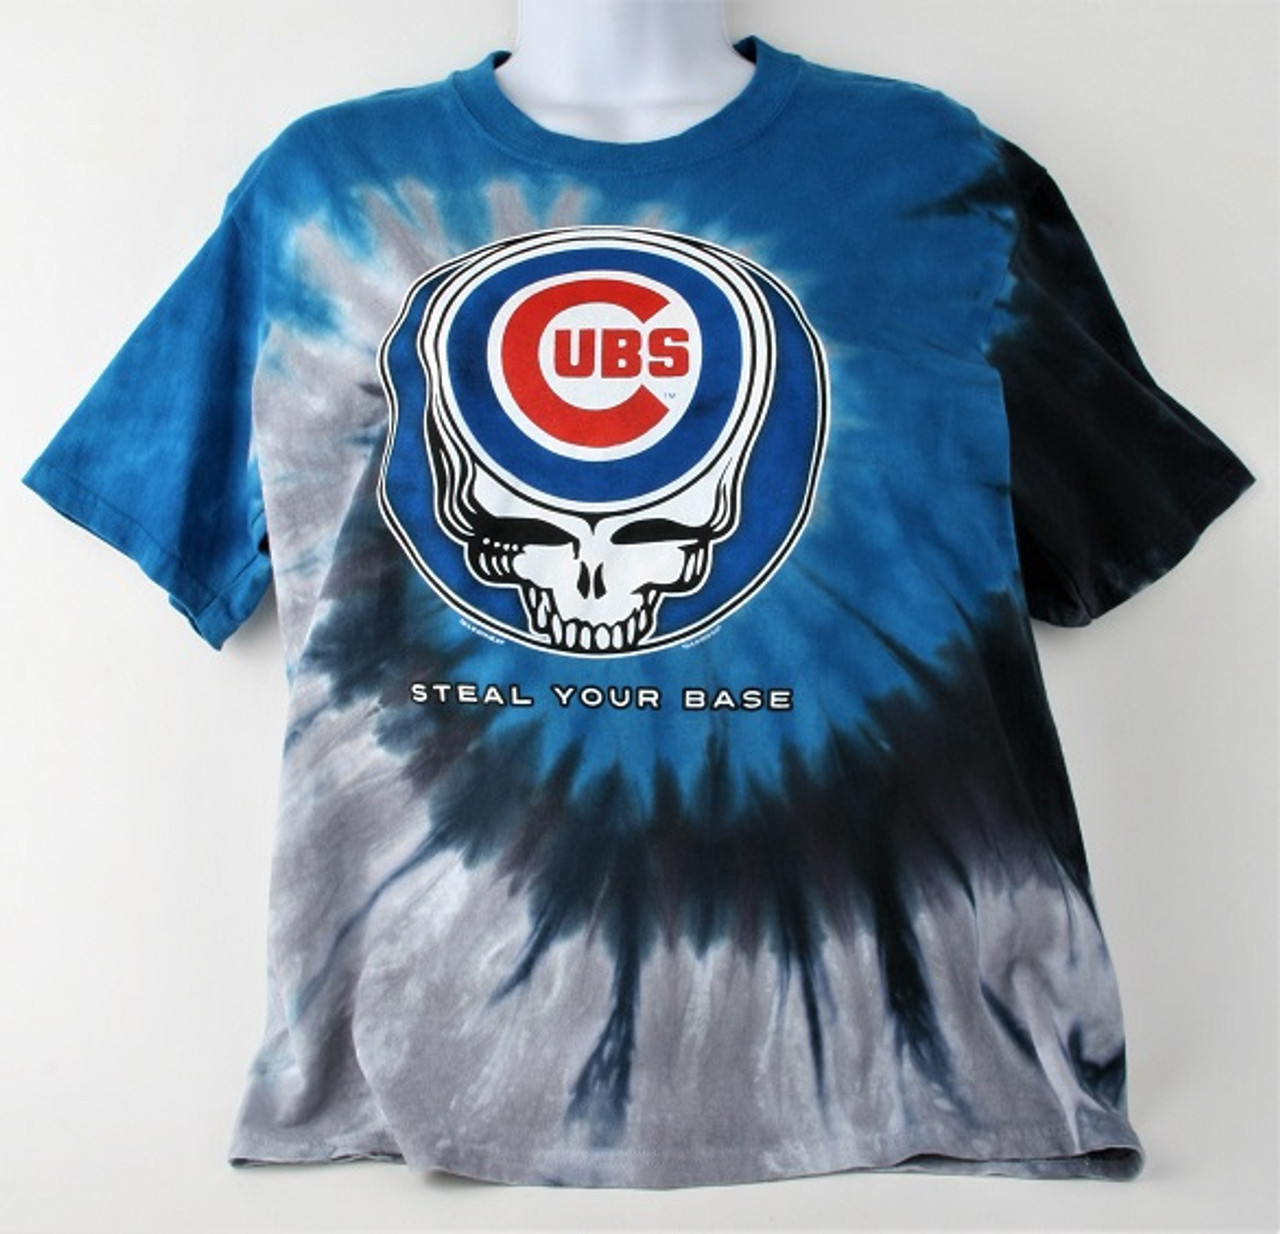 Chicago Cubs Steal Your Base Tie-Dye T-Shirt by Liquid Crystal